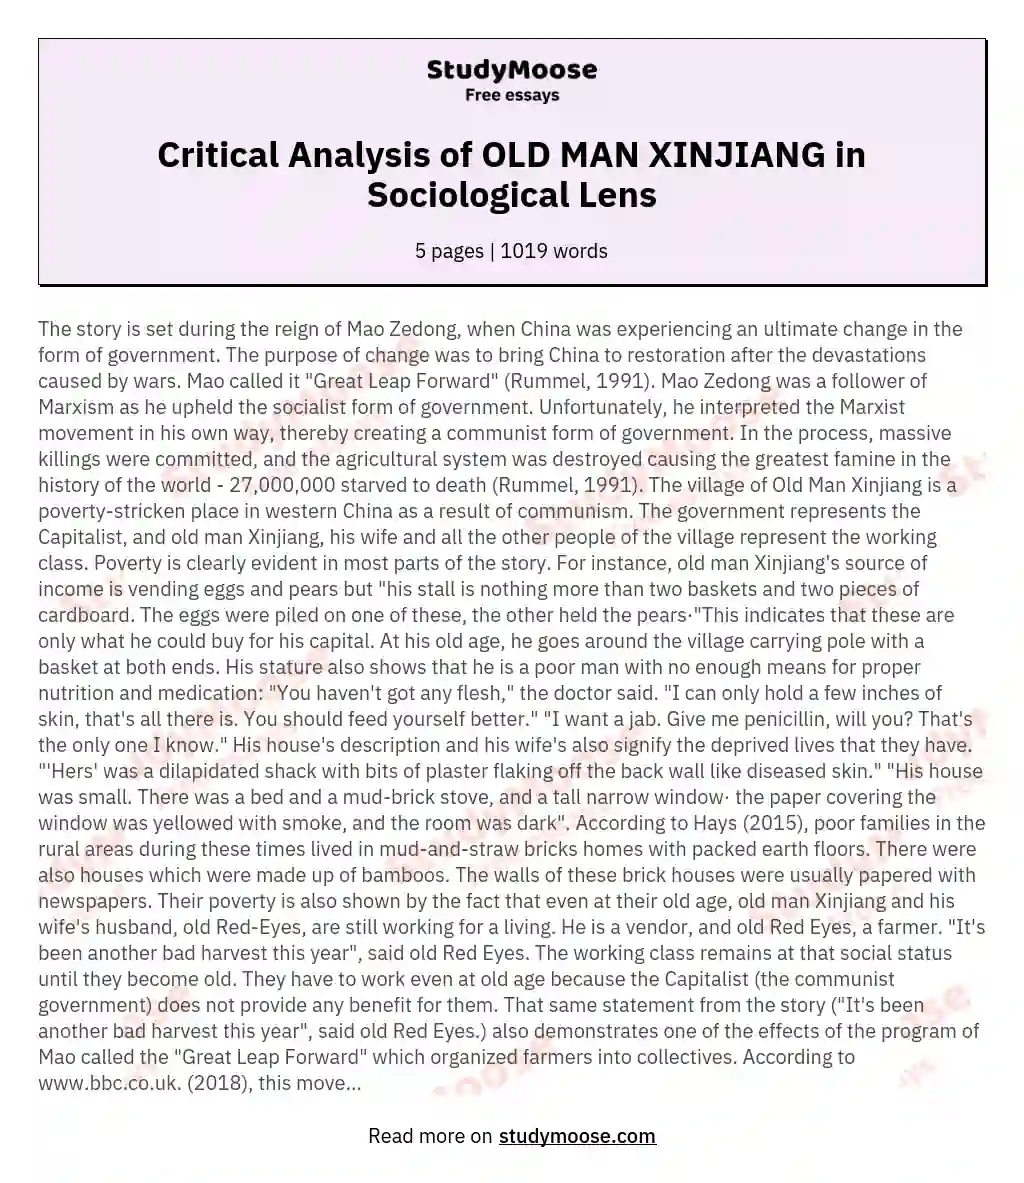 Critical Analysis of OLD MAN XINJIANG in Sociological Lens essay